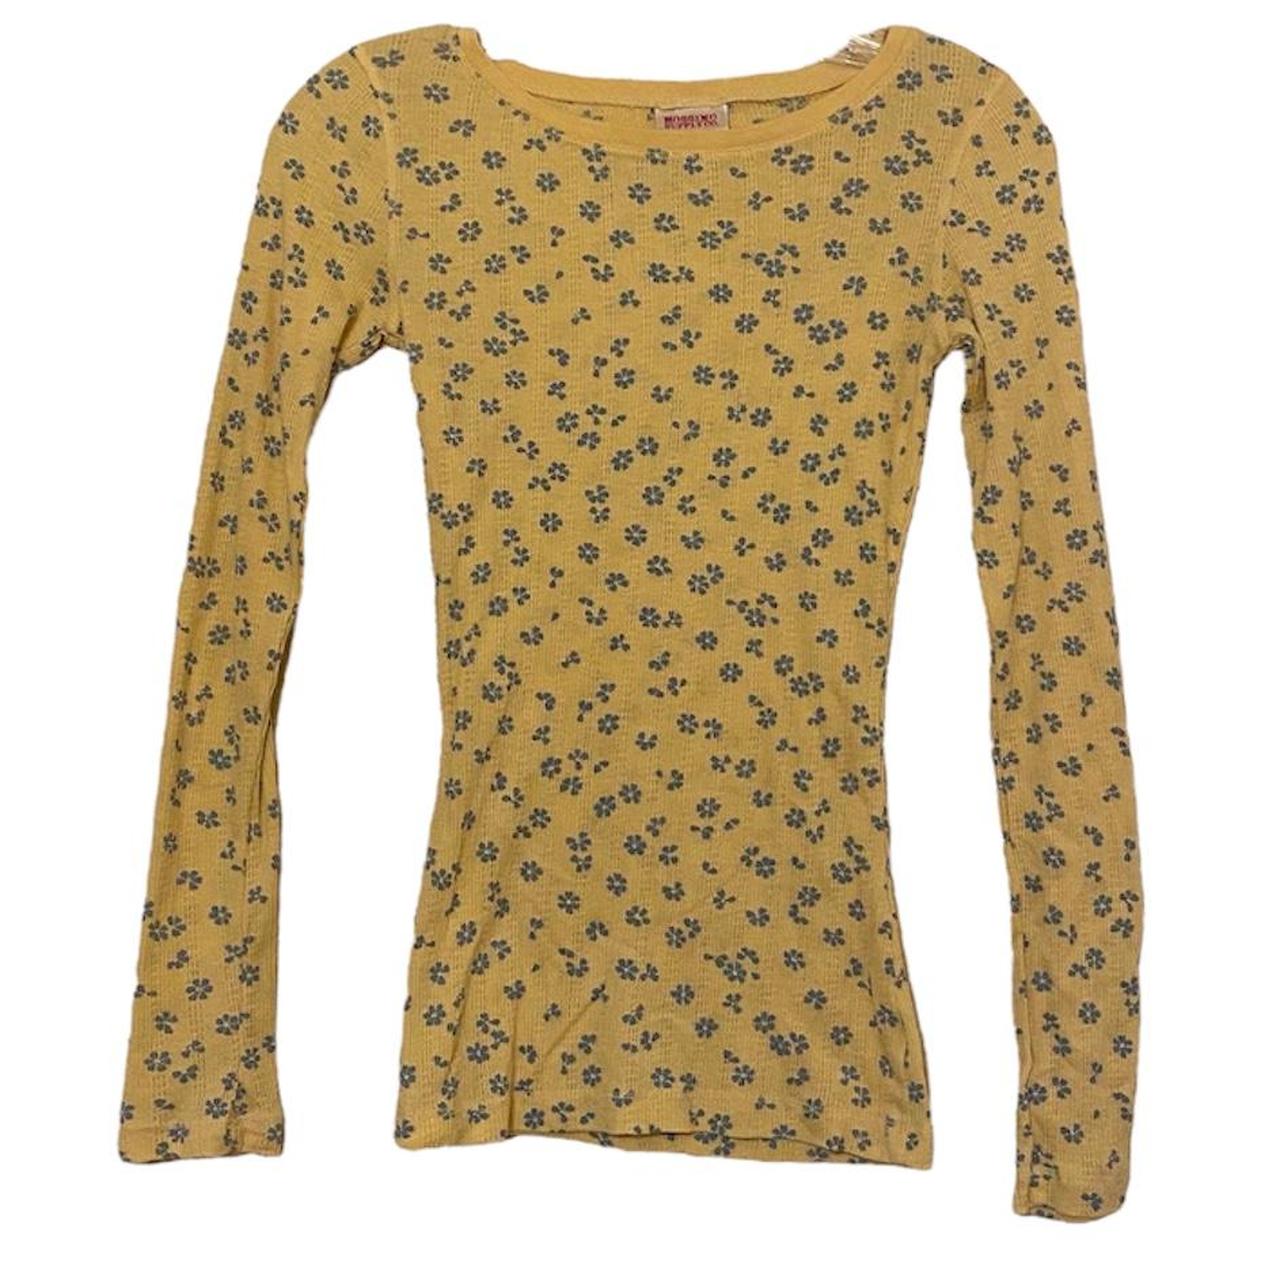 Mossimo Women's Yellow and Blue Shirt